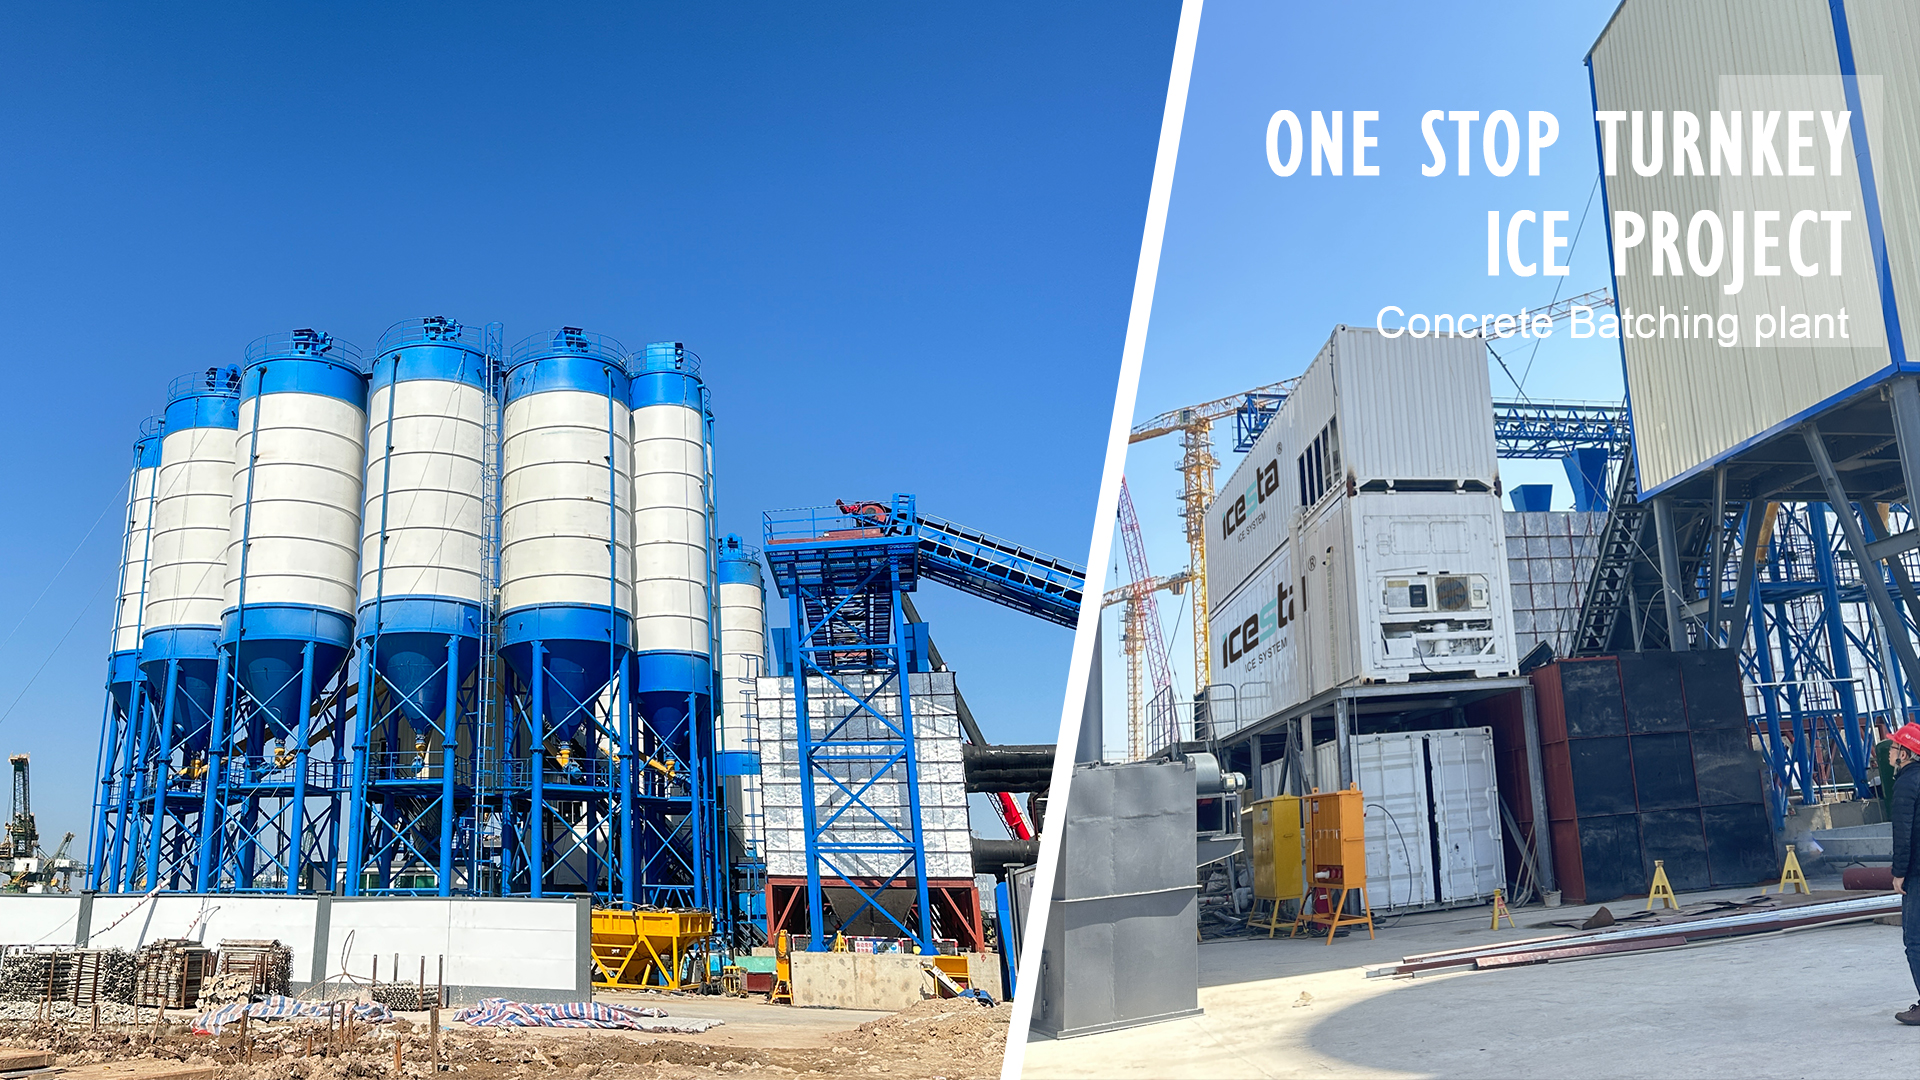 ICESTA one-stop turnkey ice making project - the concrete batching plant cooling system was installed